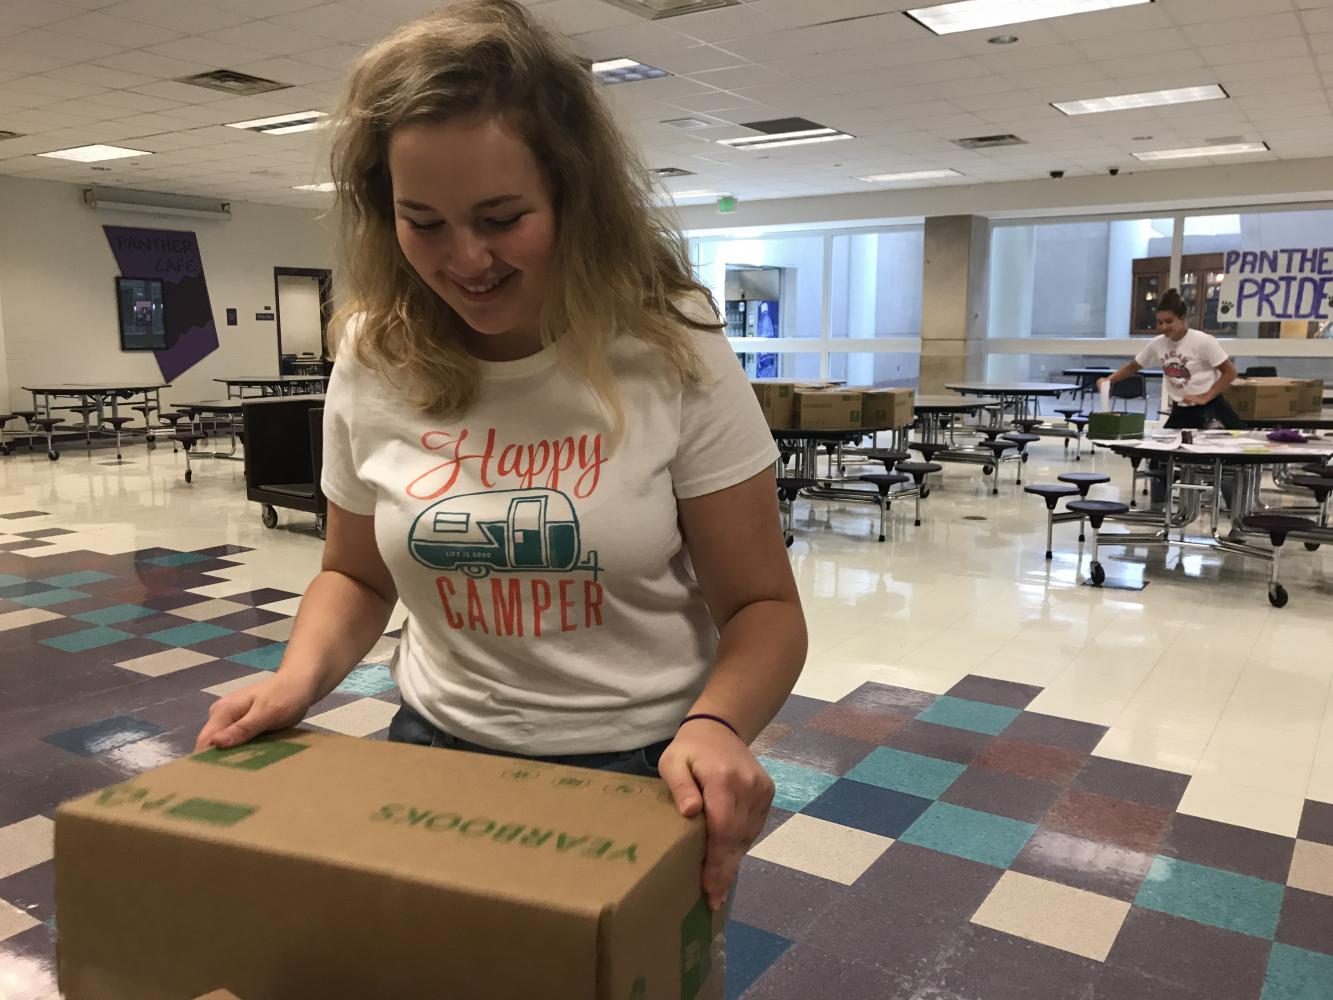 Senior Zoe Berenzstein helps organize yearbooks to be handed out to students